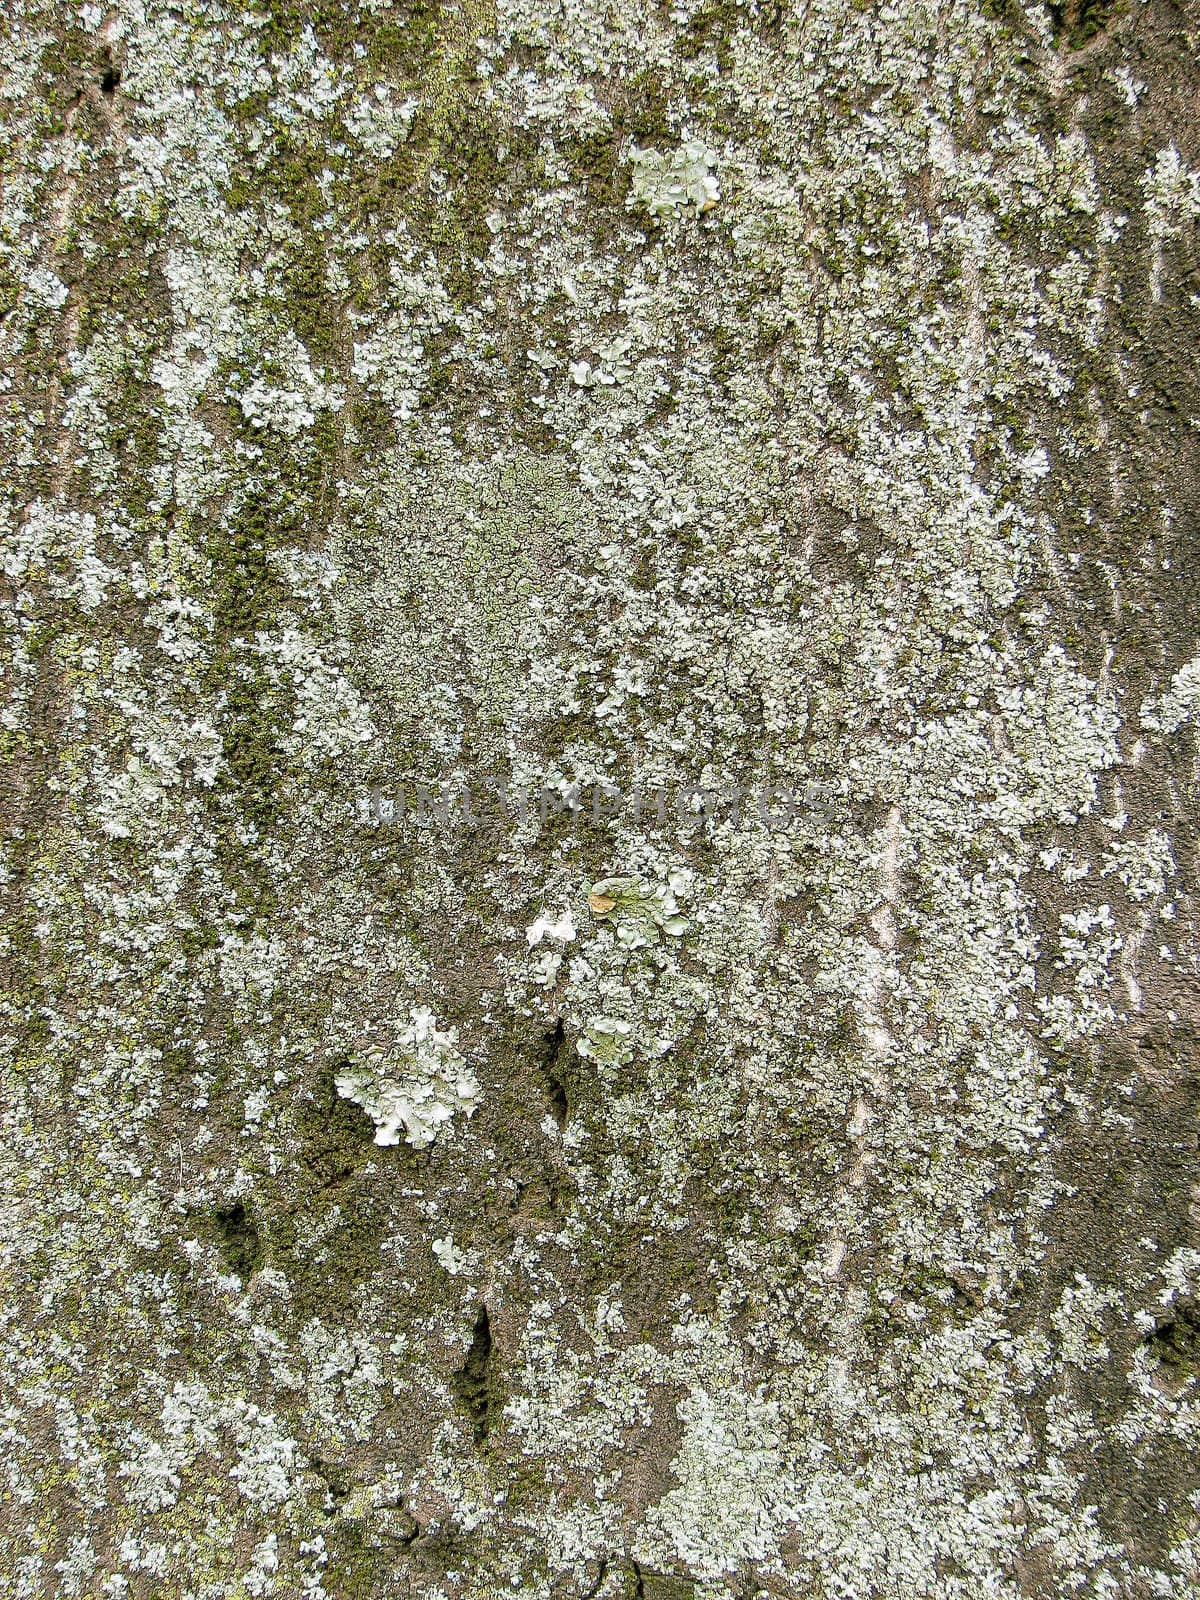 Close up of mossy bark on a tree.